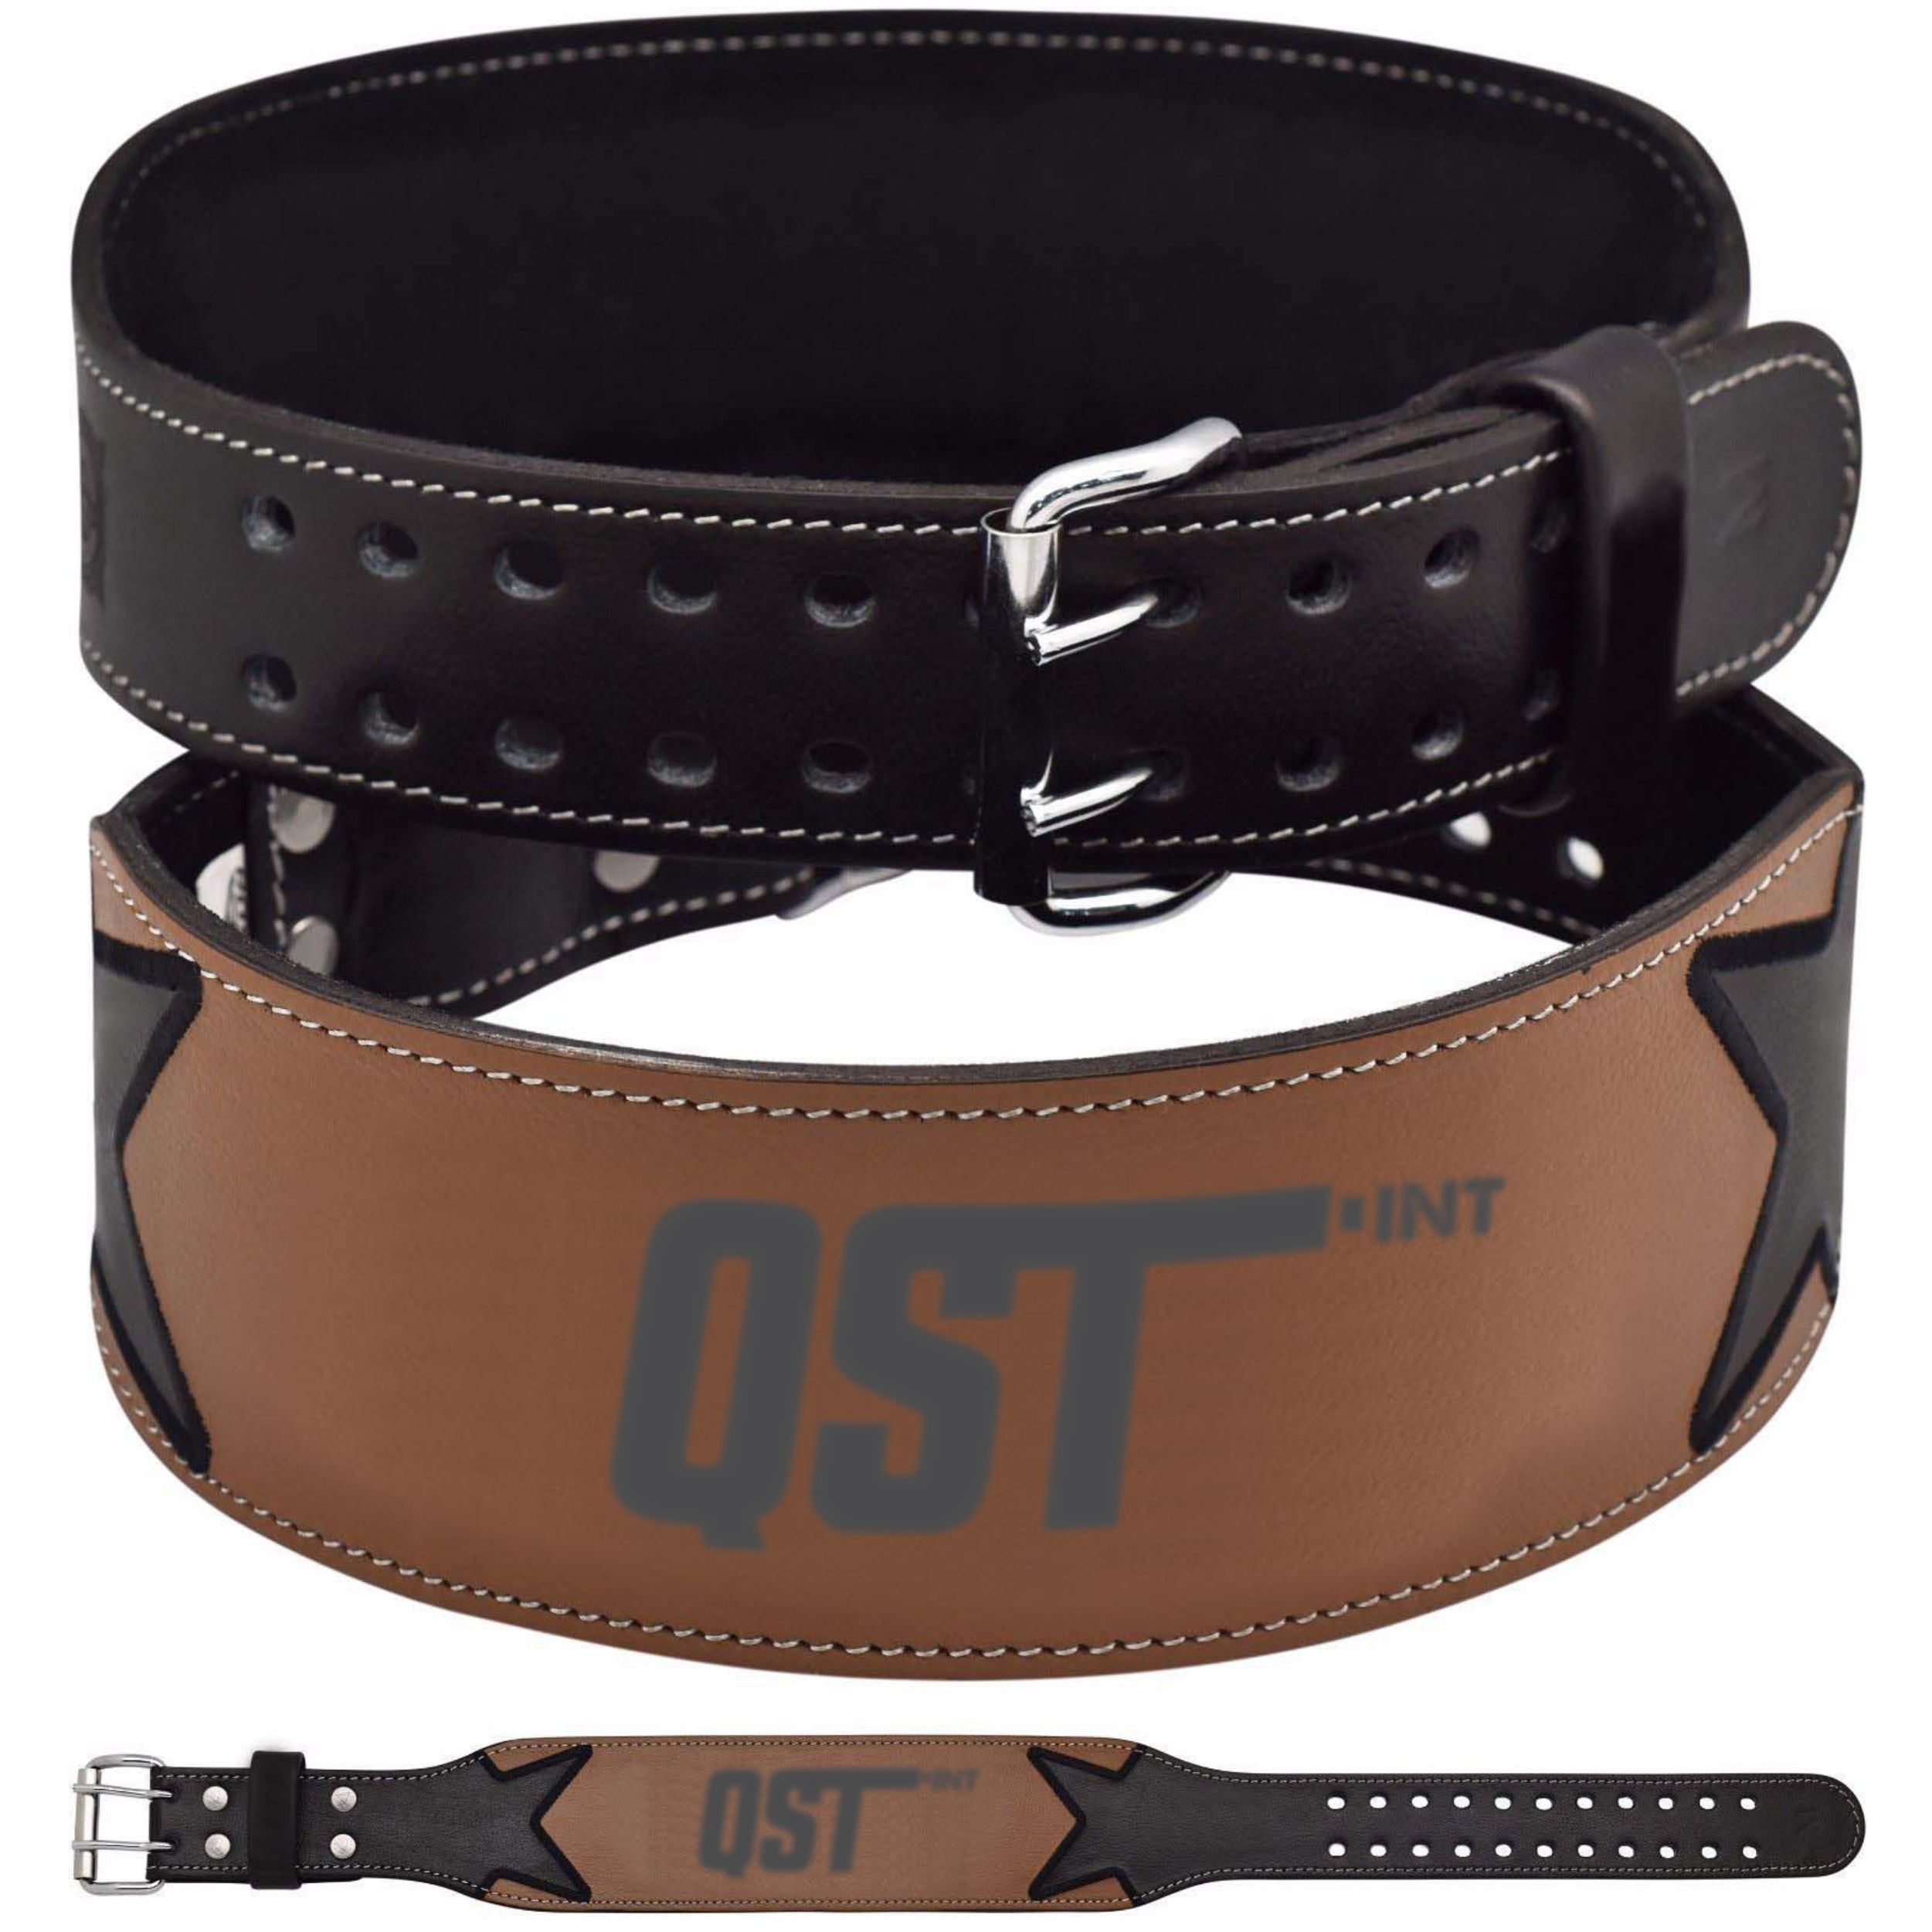 Leather Weightlifting Belt - ACS-1202